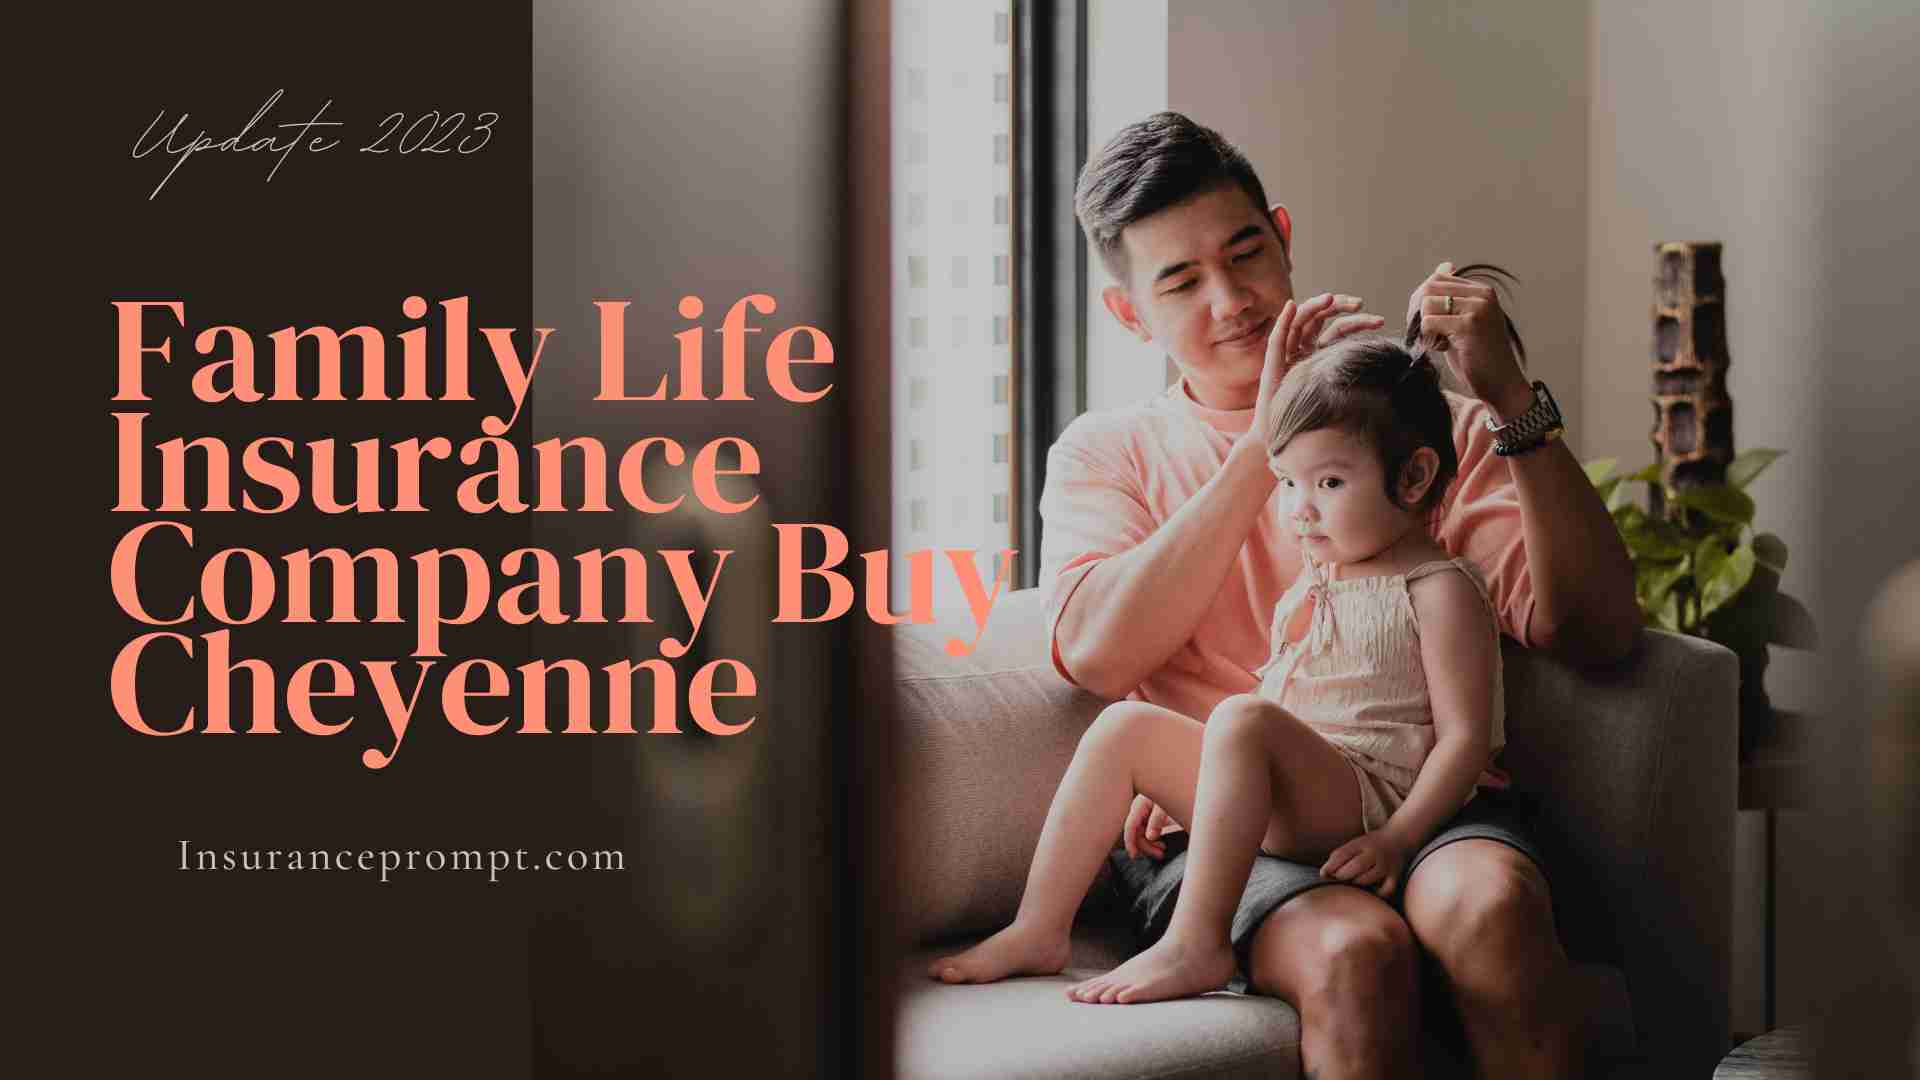 Family Life Insurance Company Buy Cheyenne (Ultimate Guide)